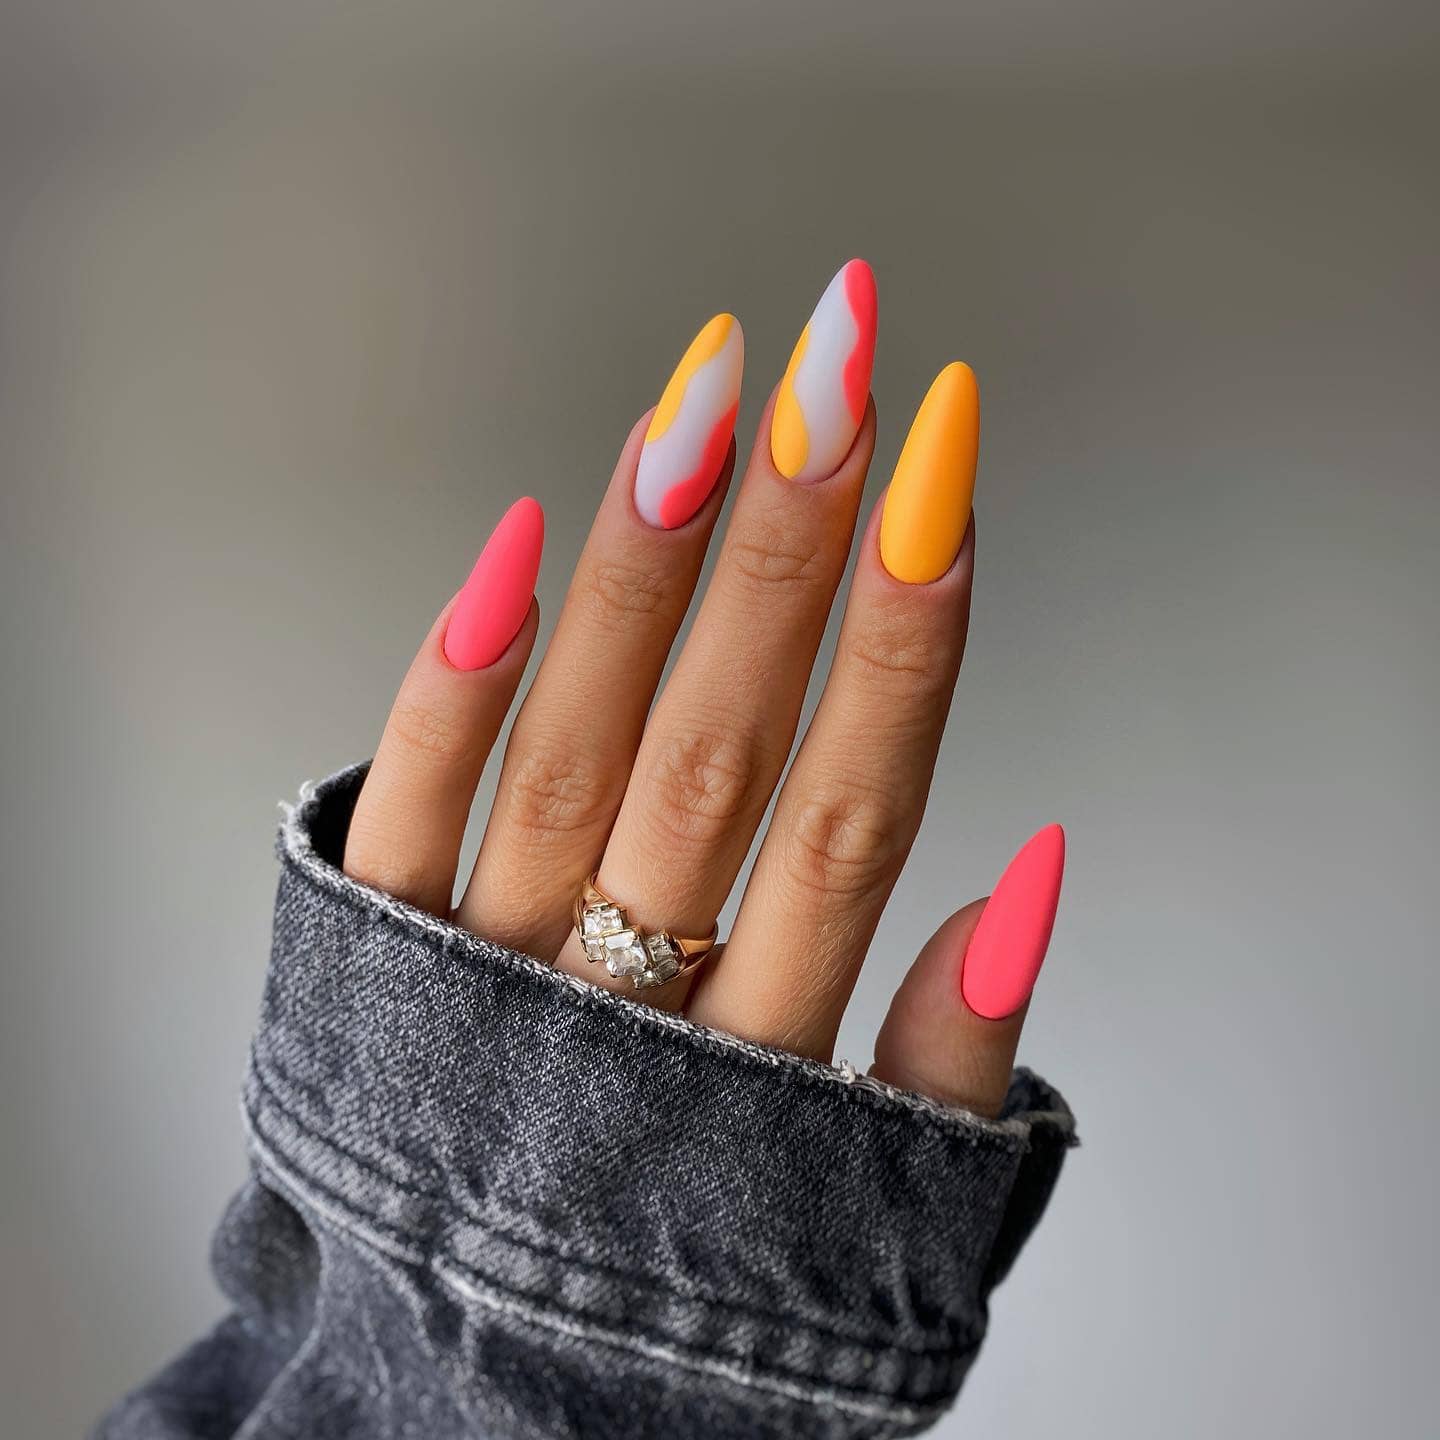 Over 100 Bright Summer Nail Art Designs That Will Be So Trendy images 93